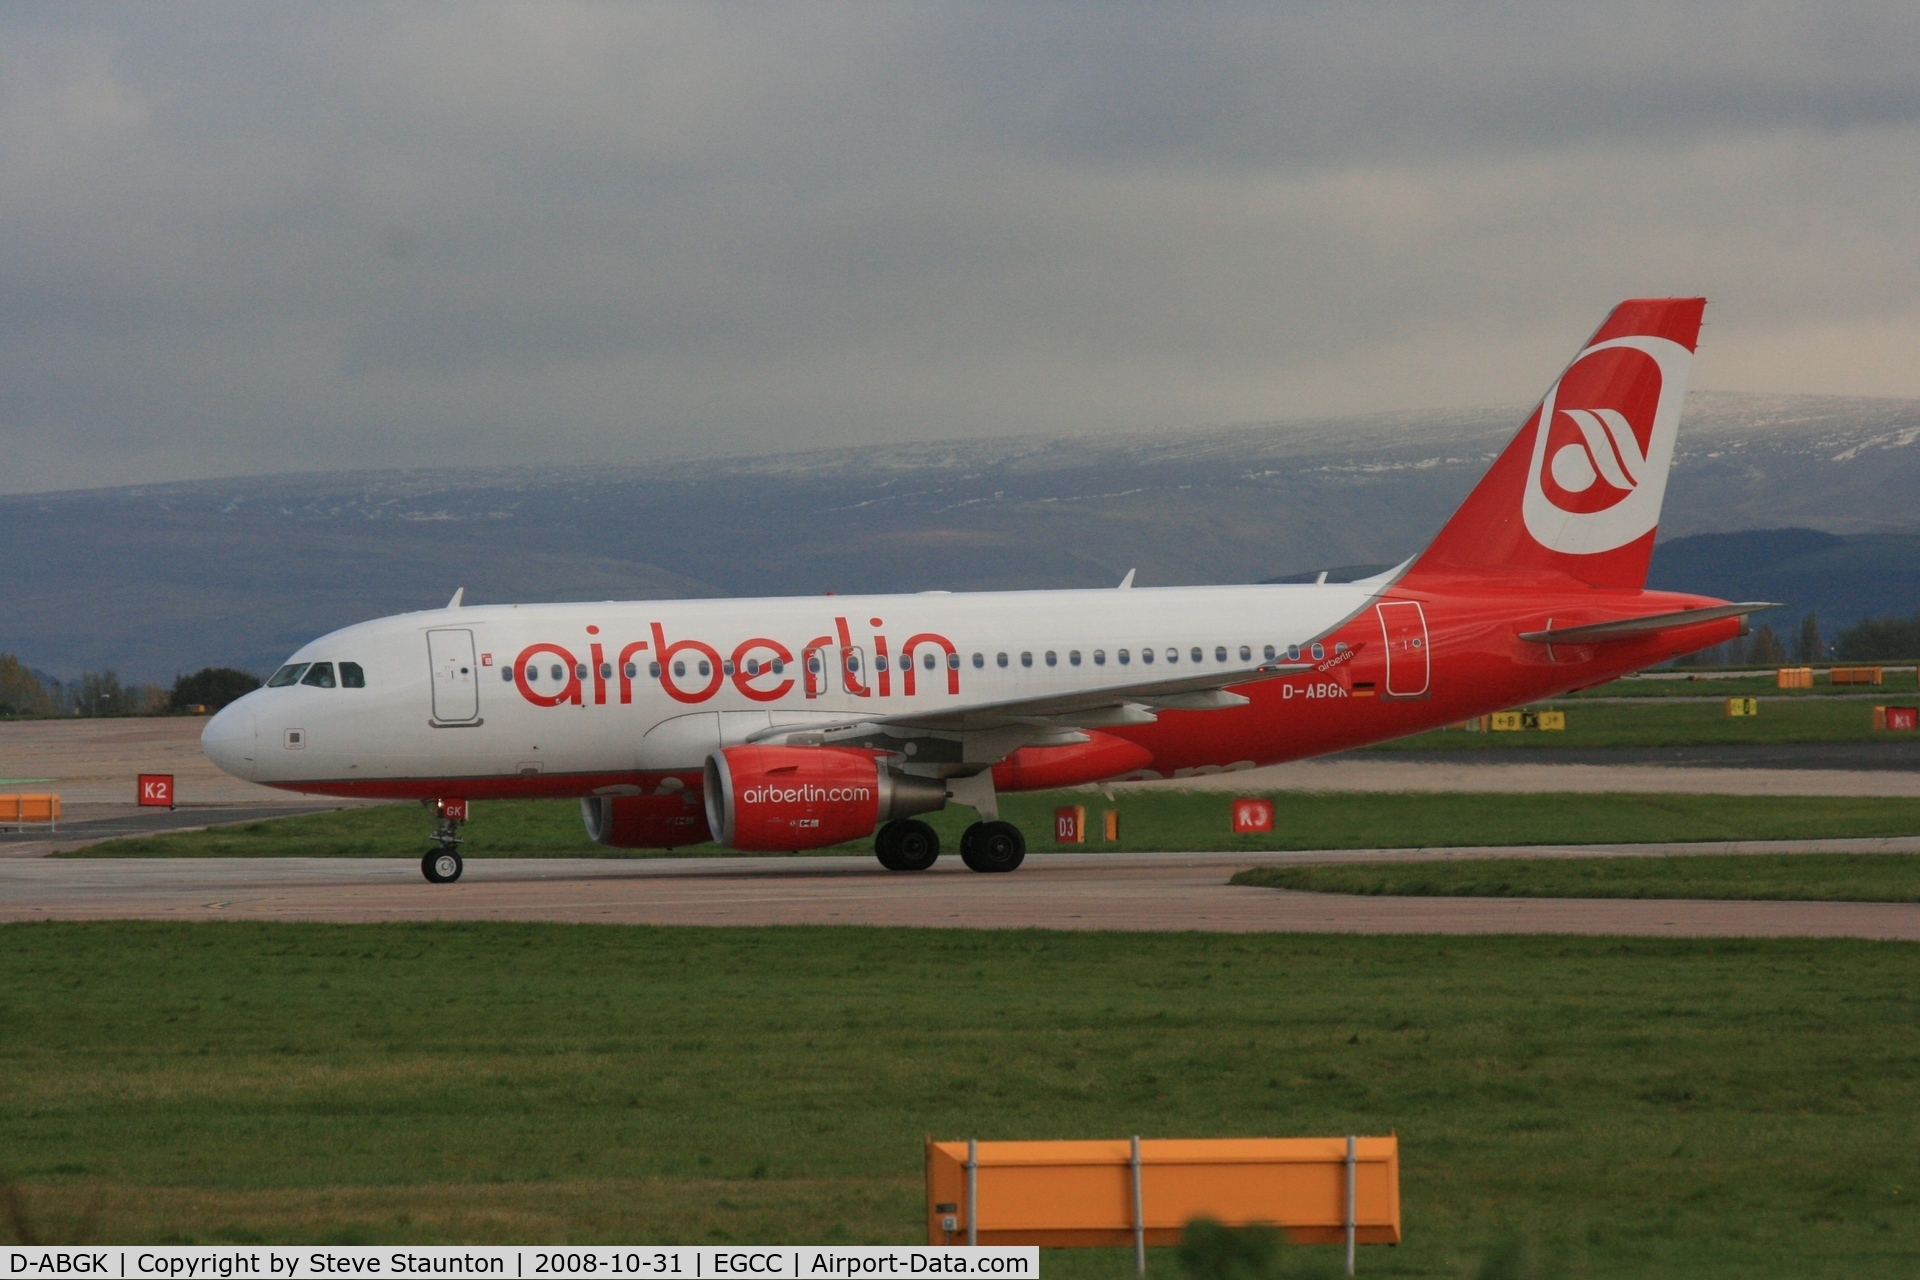 D-ABGK, 2008 Airbus A319-112 C/N 3447, Taken at Manchester Airport, October 2008